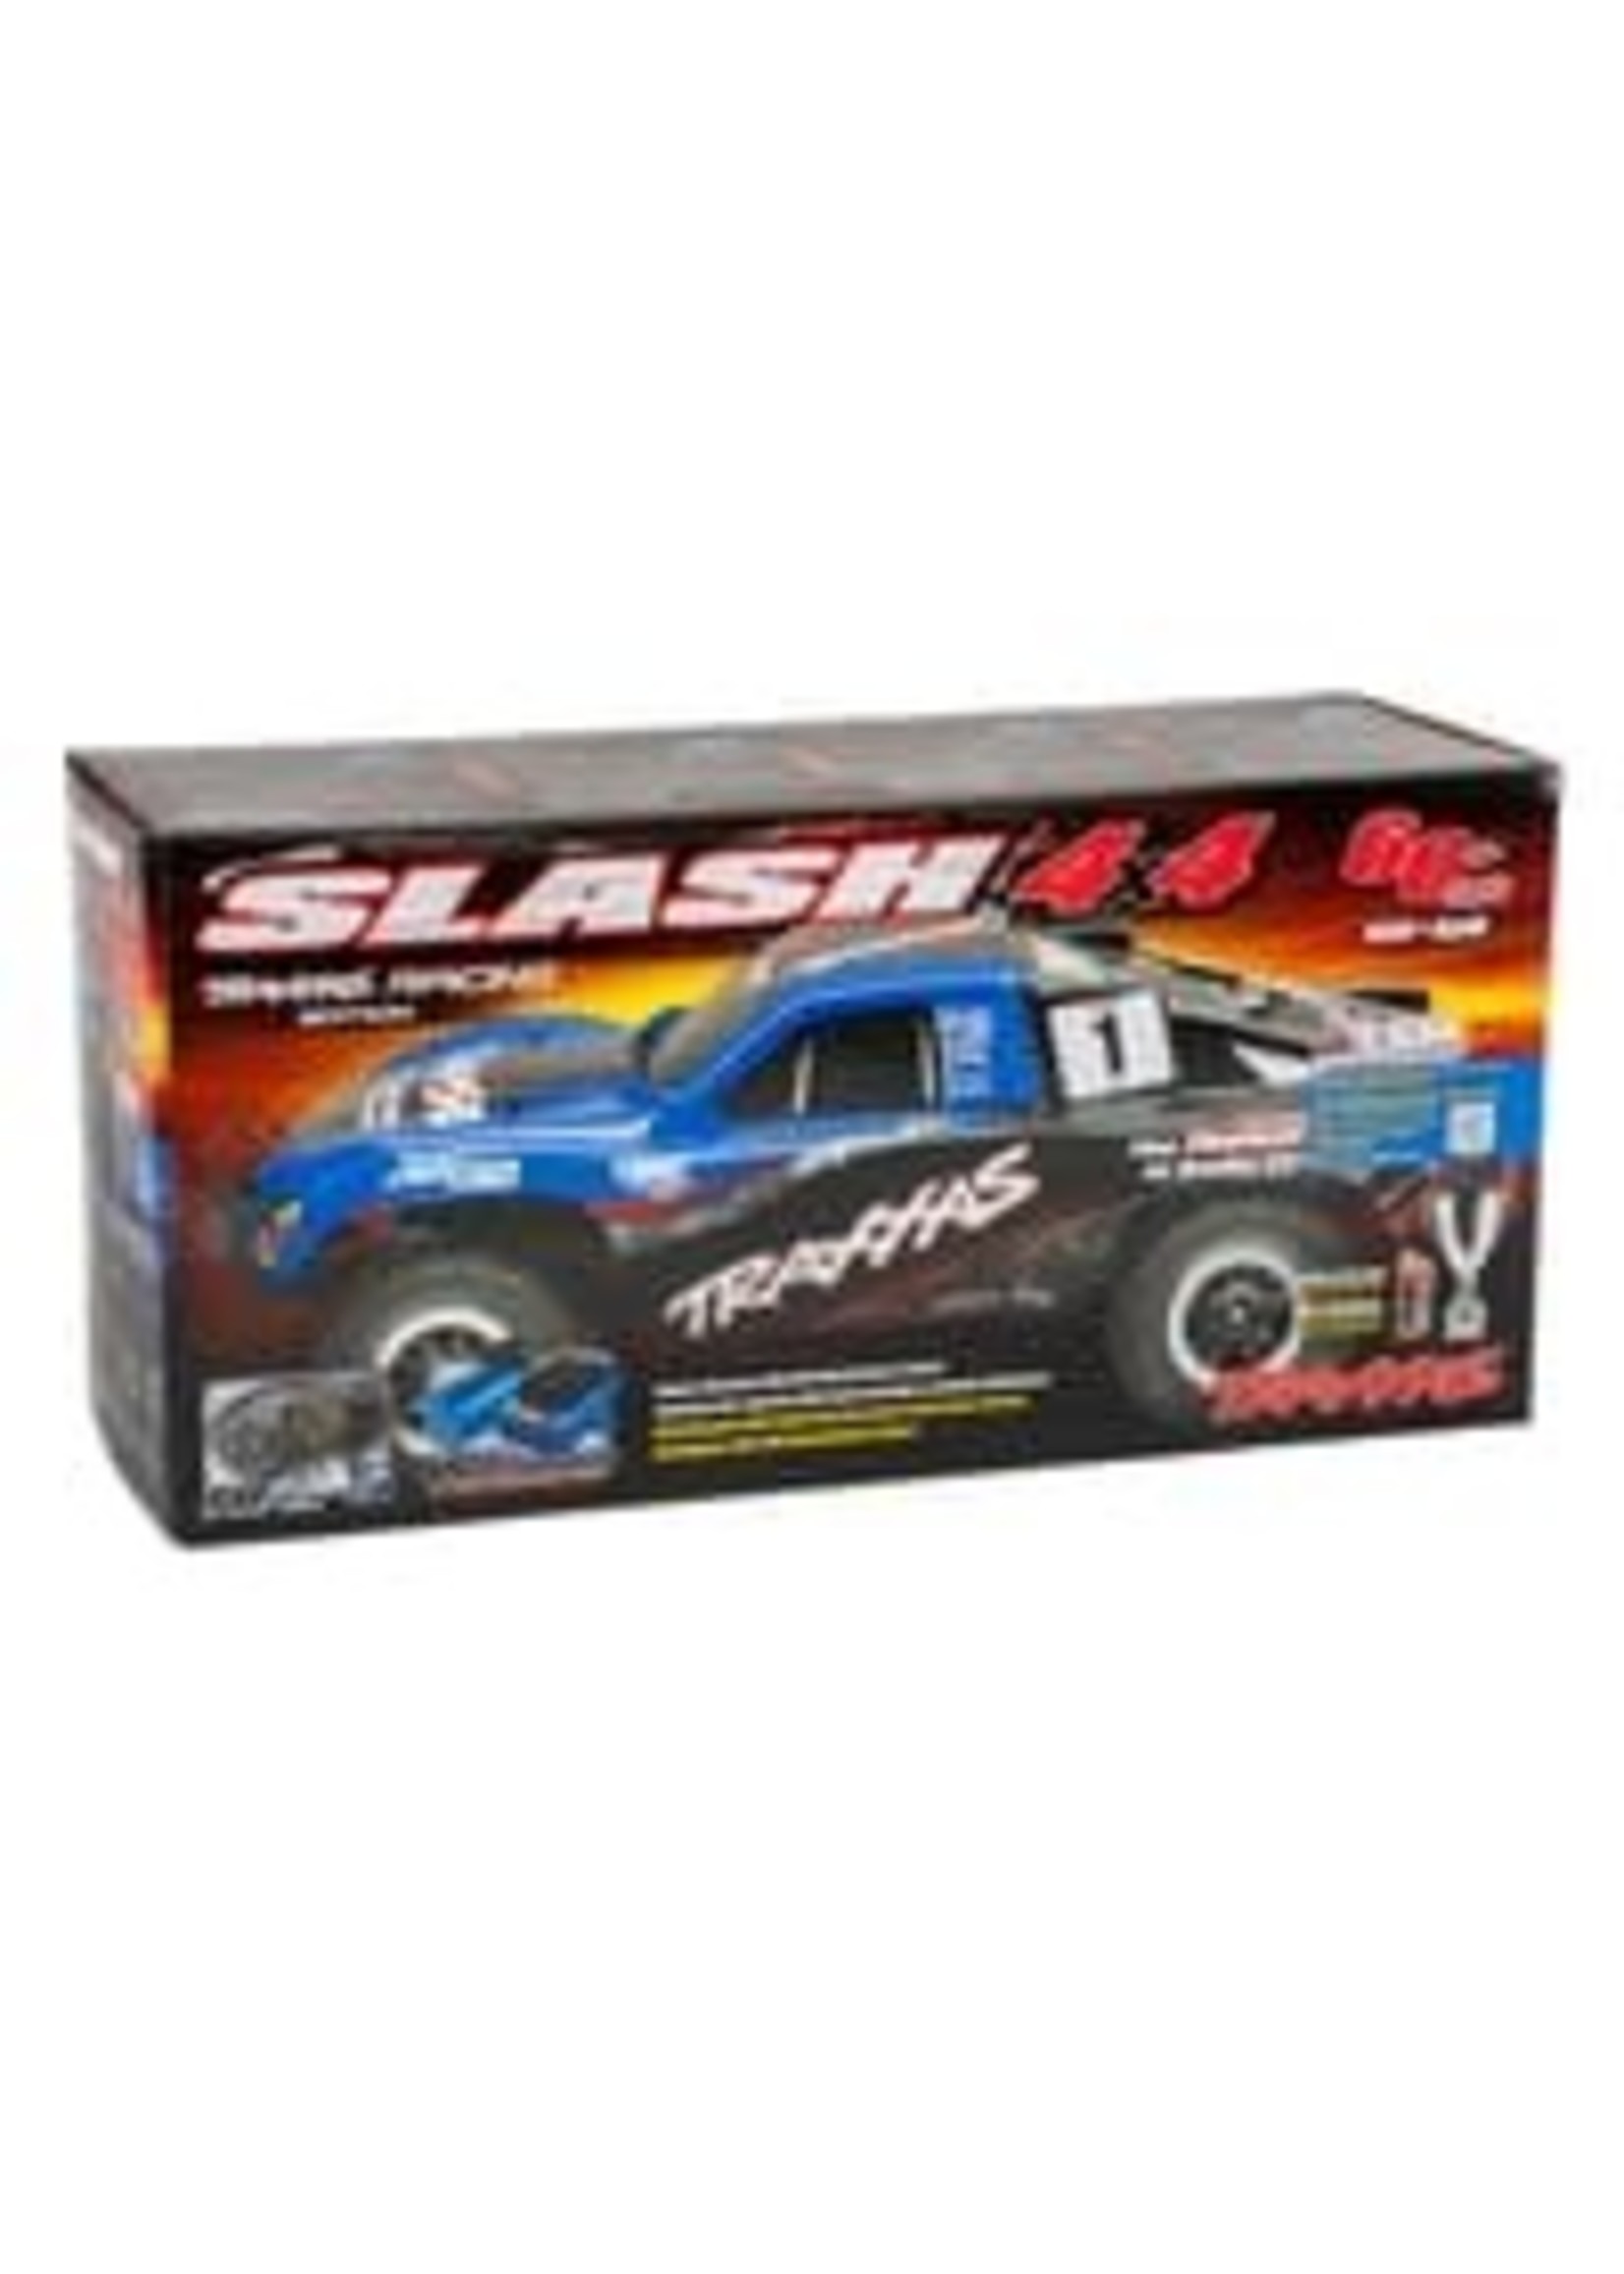 Traxxas 68086-4-RED Slash 4X4 VXL: 1/10 Scale 4WD Electric Short Course Truck with TQi Traxxas Link  Enabled 2.4GHz Radio System & Traxxas Stability Management (TSM)